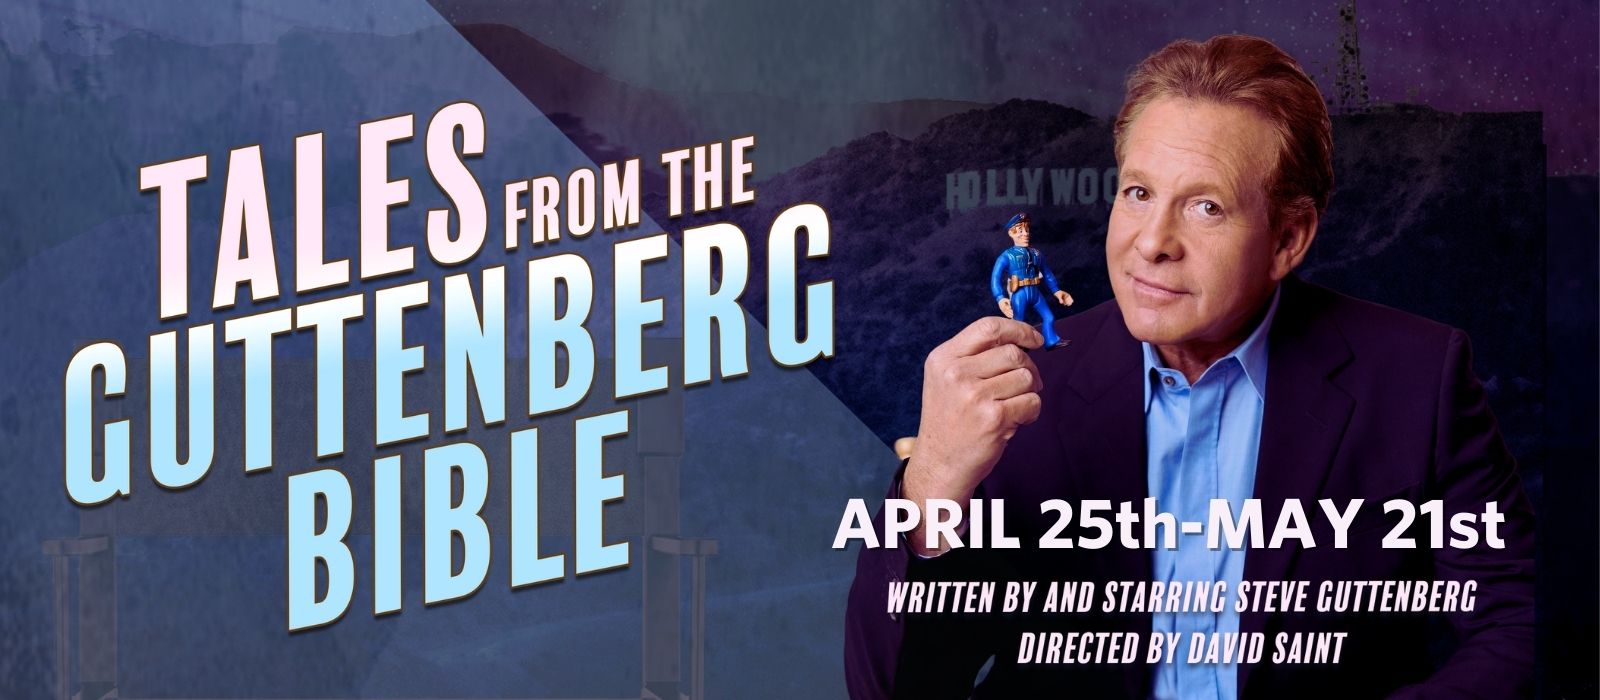 Tales from the Guttenberg Bible April 25th - May 21st. Written by and Starring Steve Guttenberg, Directed by David Saint